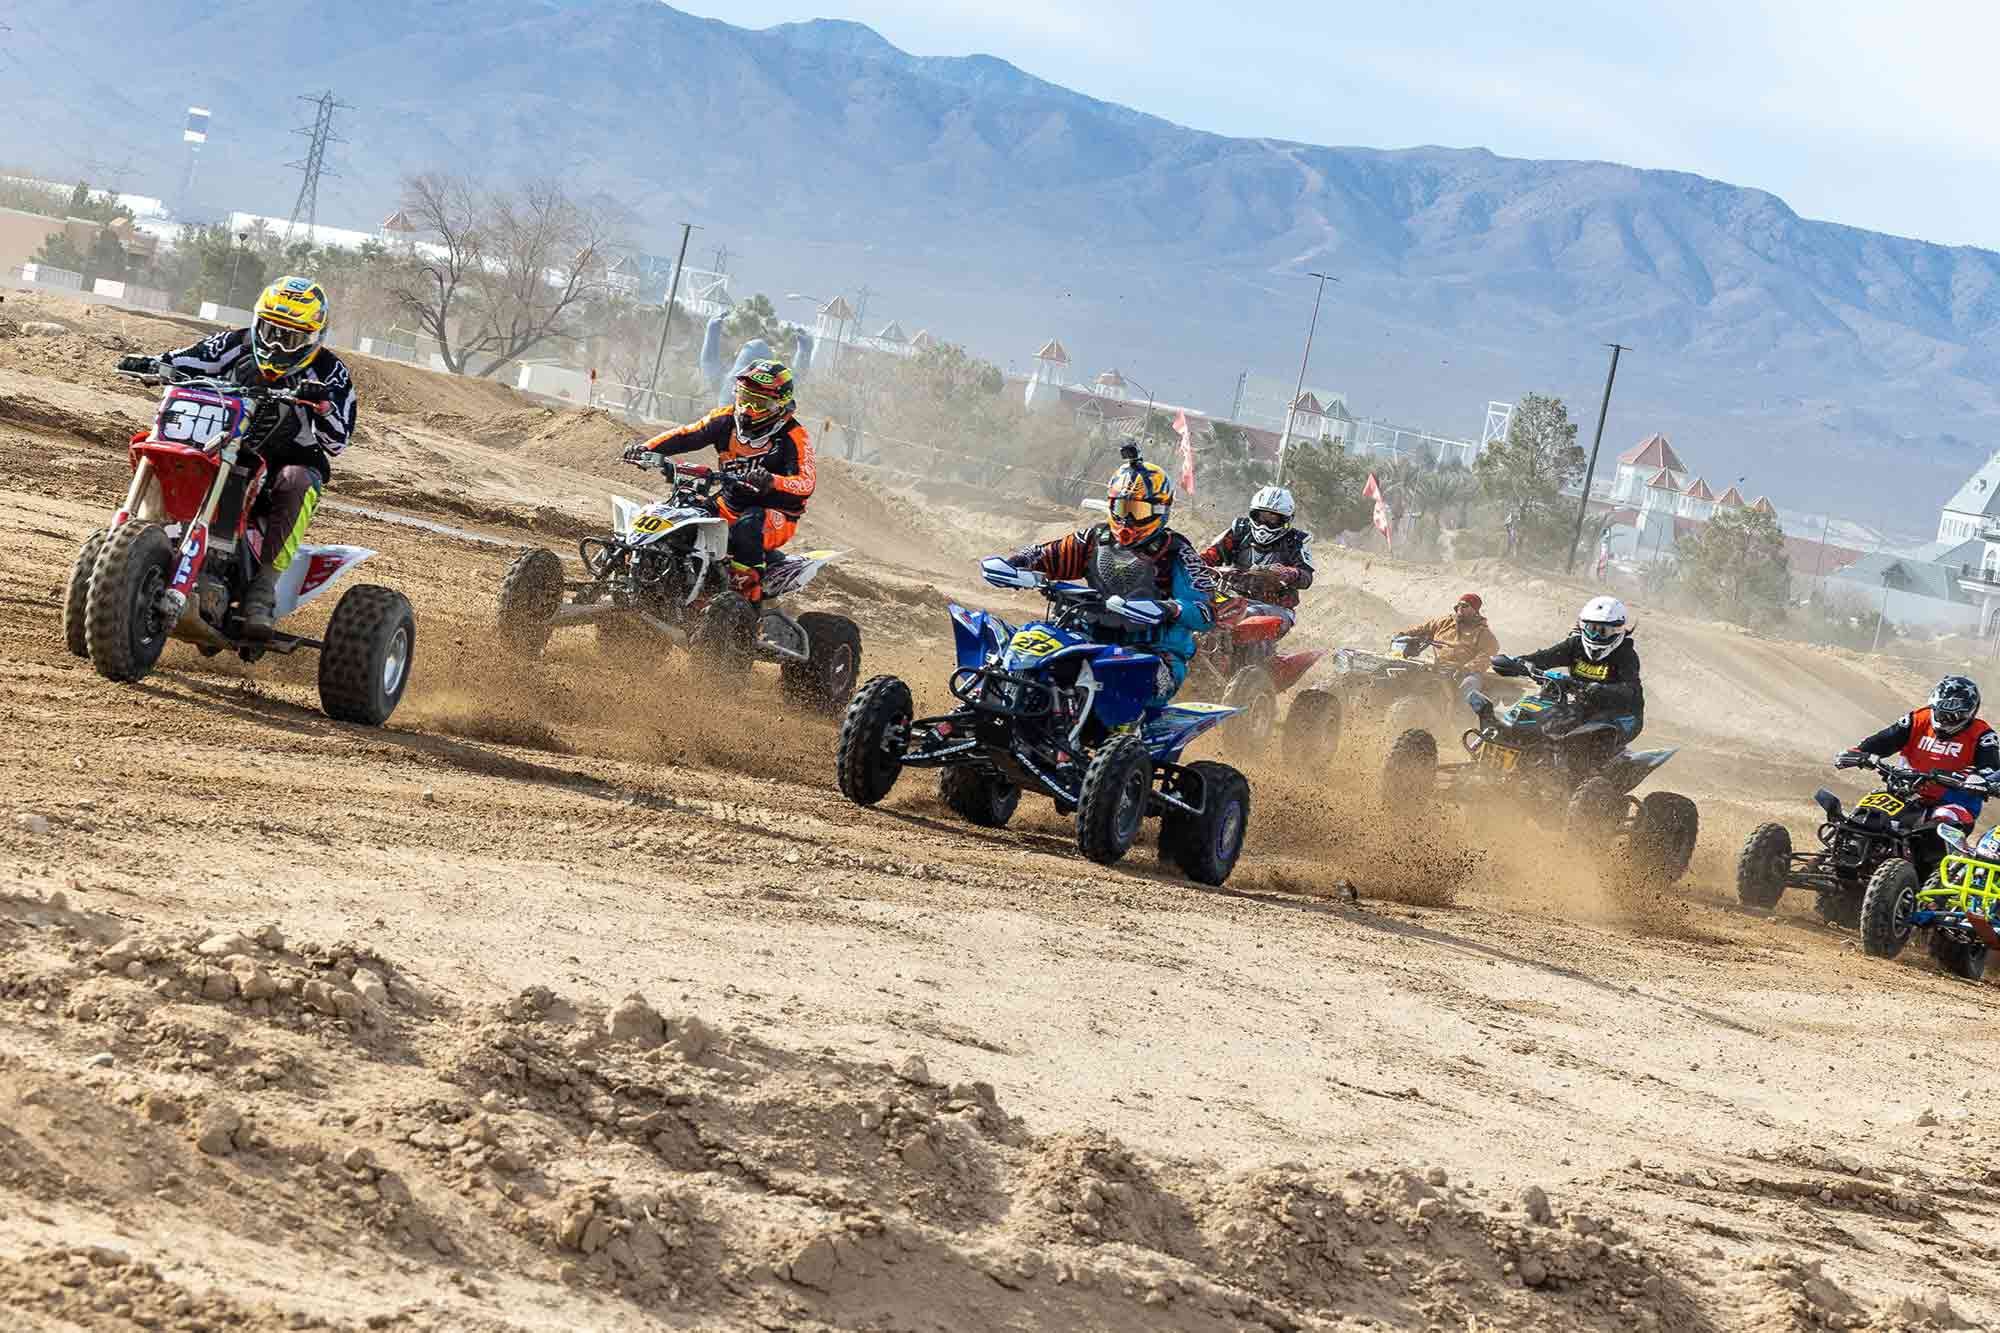 Dave Ham, on his No. 30 TPC trike, holeshots the 50+ age group ATV class at WORCS 2022 Round 1 in Primm, Nevada.